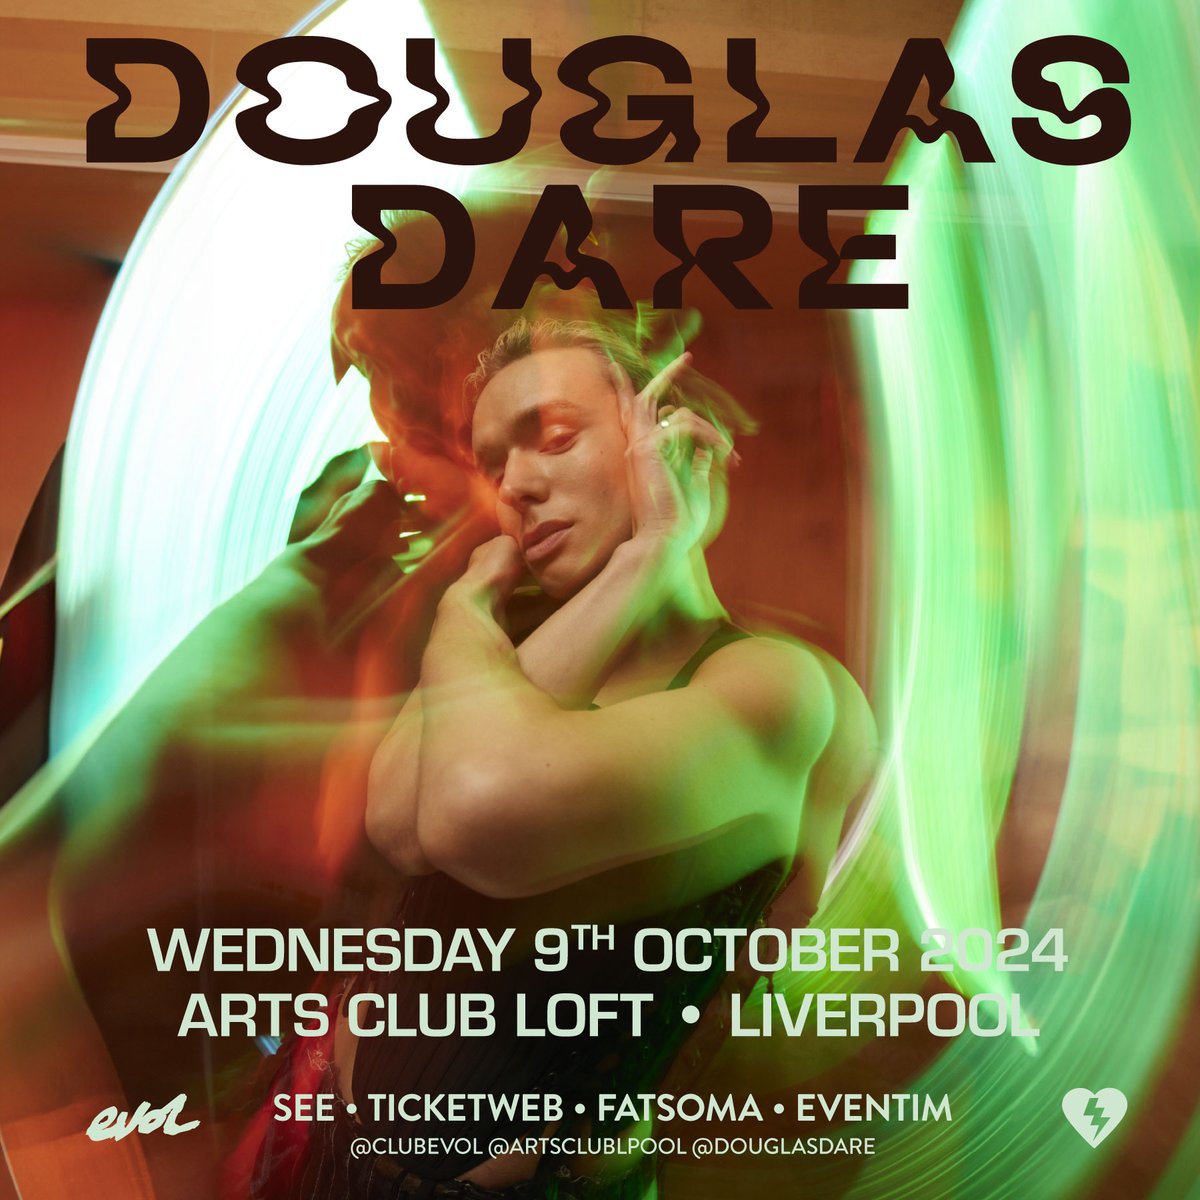 OUT NOW: 𝐎𝐌𝐍𝐈 @DouglasDare

'A scintillating... joyous, electronic-propelled return' @ClashMagazine

'...steeped in personal storytelling & deft contrasts. Welcome to the darkwave disco' @louderthanwar

𝐋𝐈𝐕𝐄: @artsclublpool October 9th
 
𝐓𝐈𝐗: seetickets.com/event/douglas-…